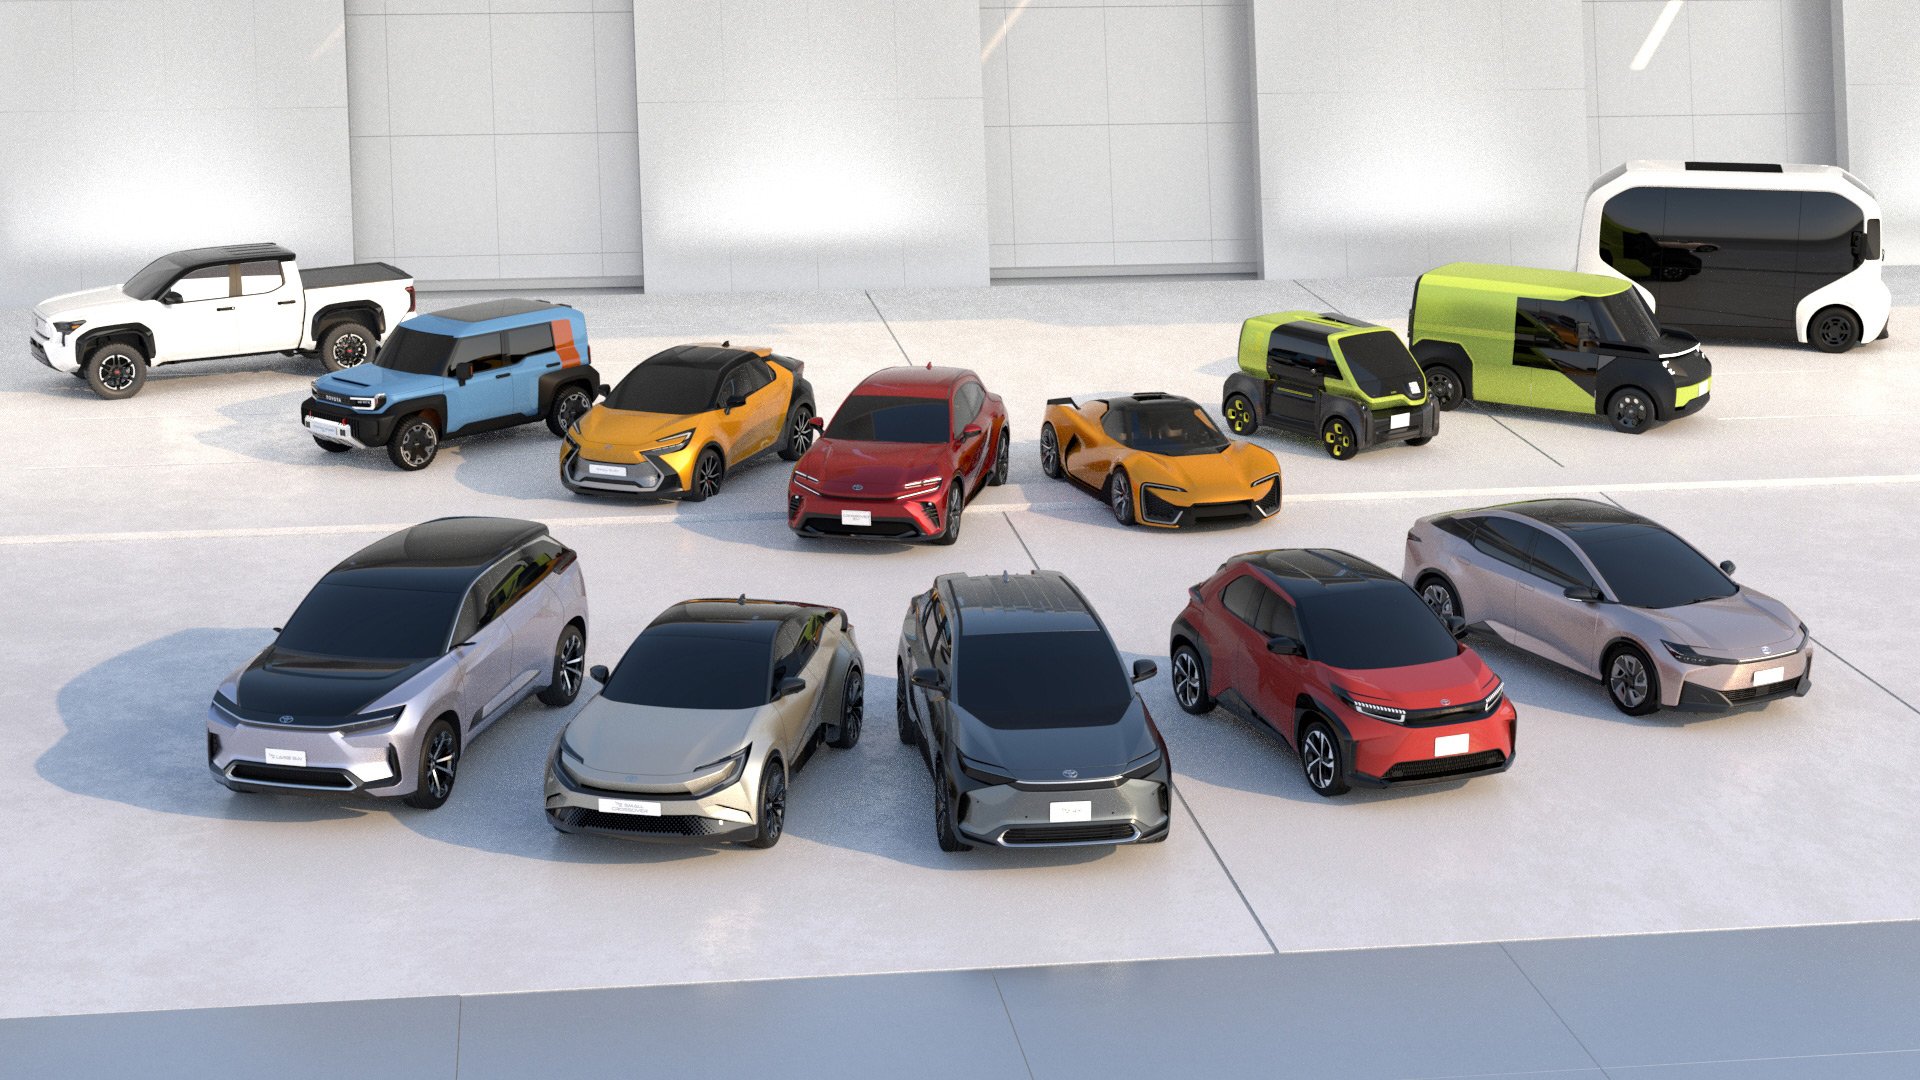 Toyota plans 30 new EVs globally by 2030, teases conceptsToyota plans 30 new EVs globally by 2030, teases concepts